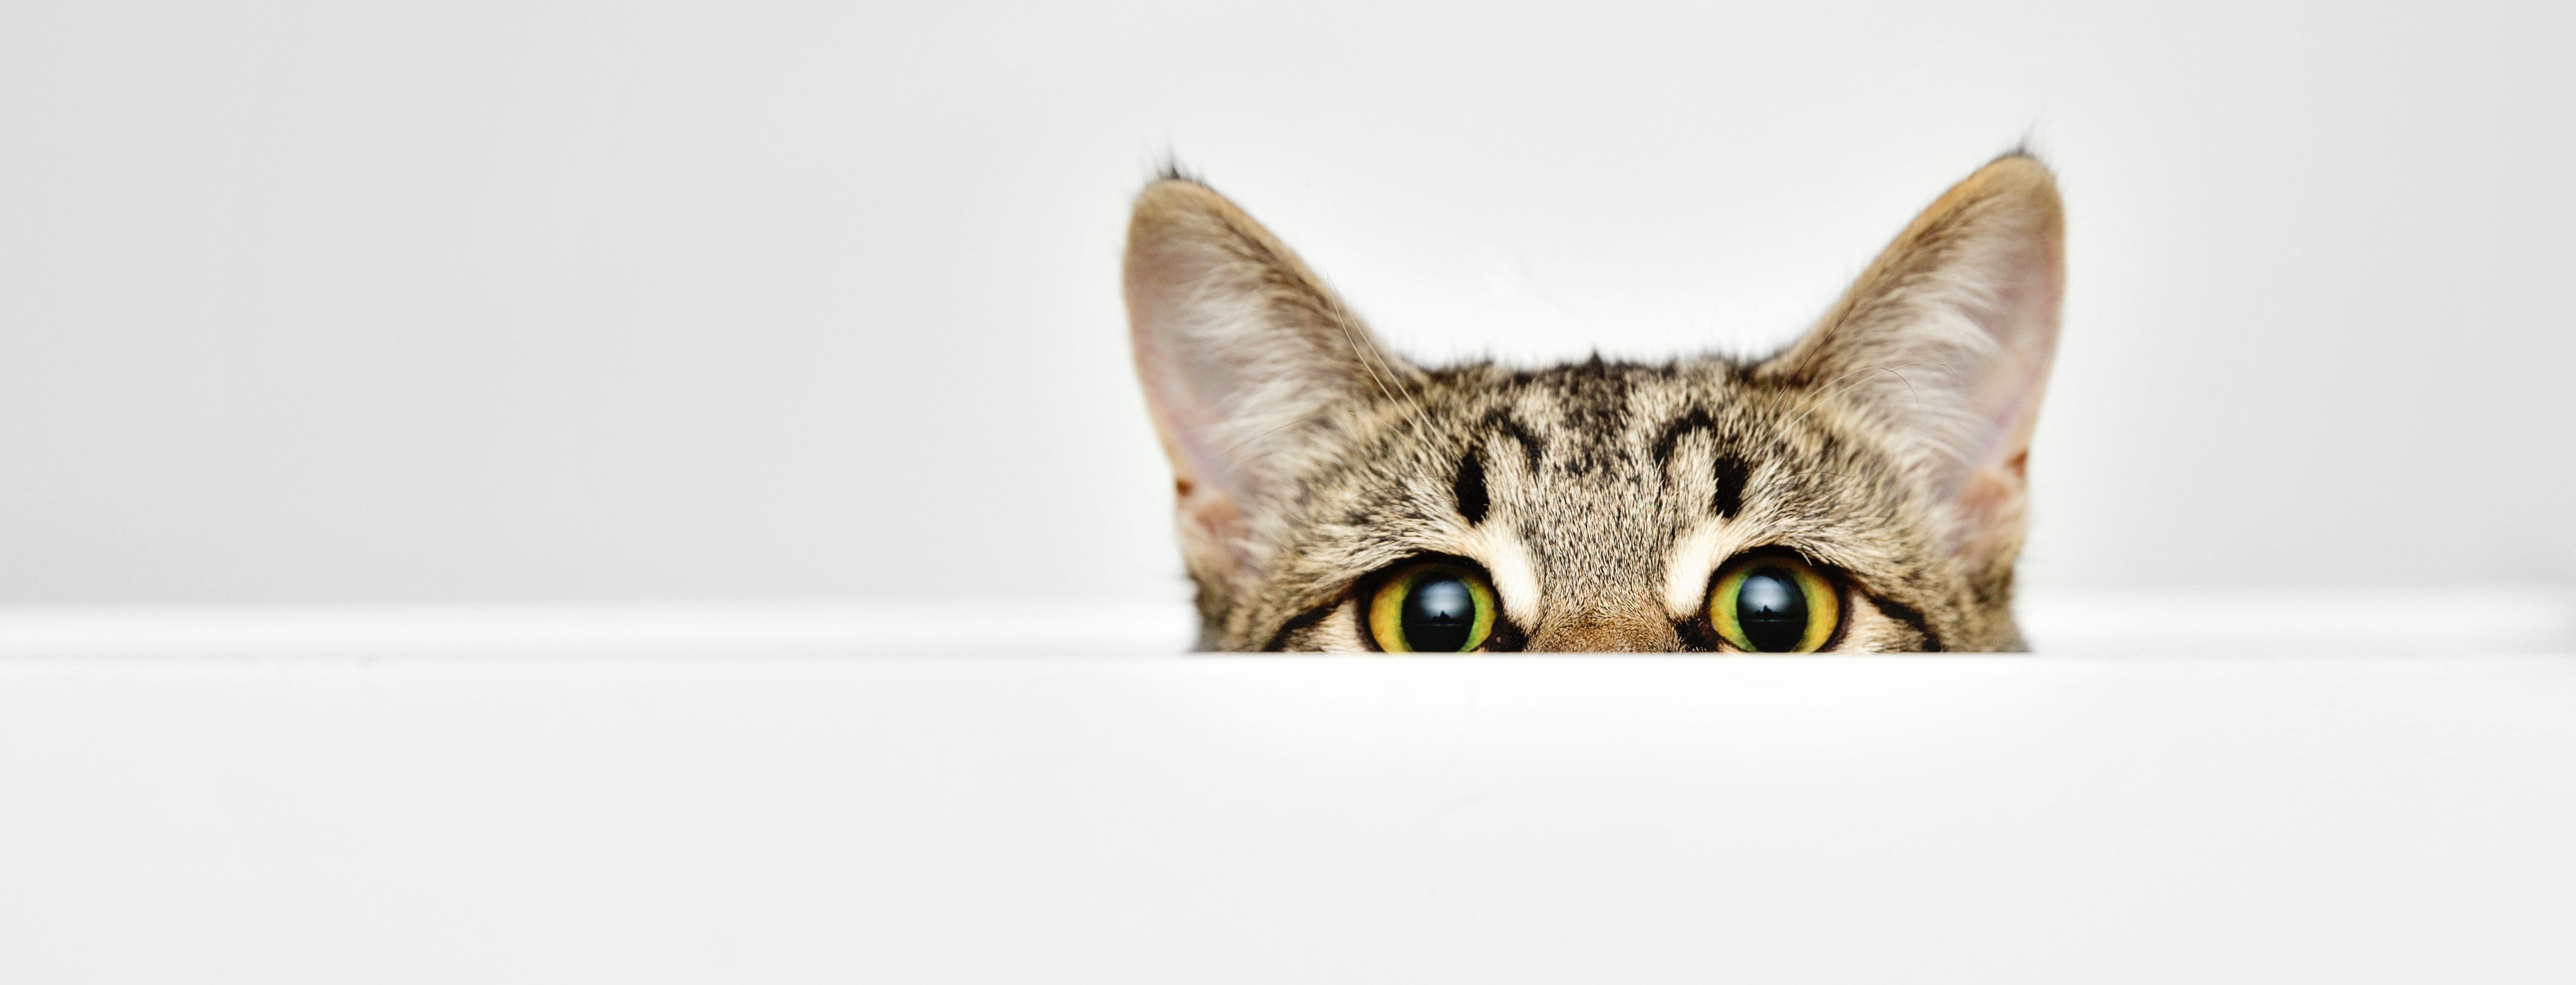 cat-peeking-over-white-wall-with-only-eyes-and-ears-visible-3.jpg